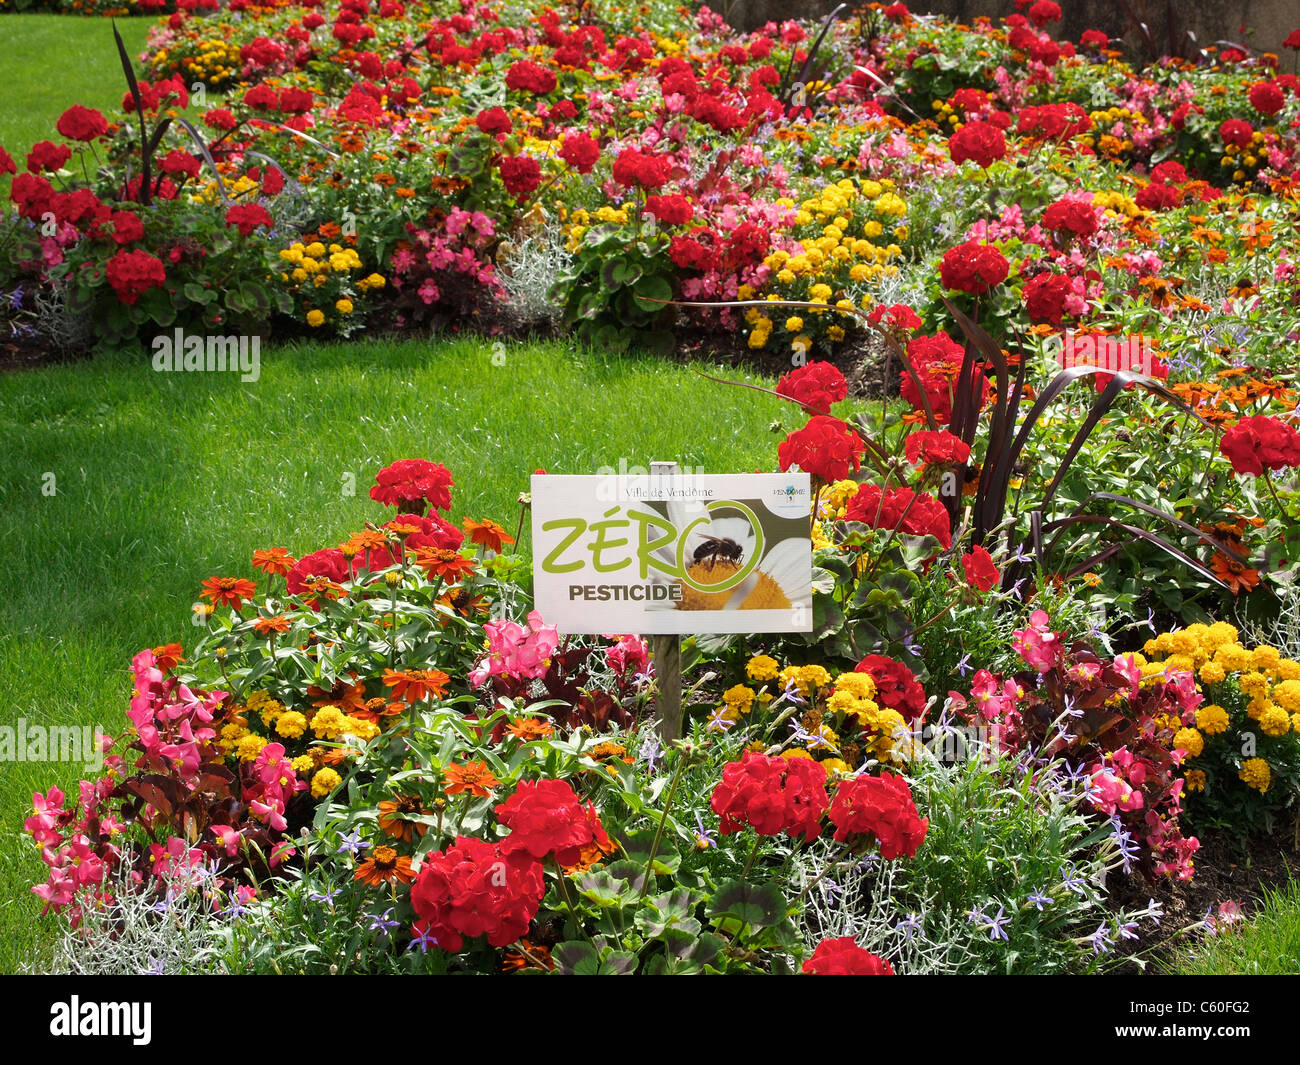 Very colourful bed of flowers with zero pesticides sign in Vendome, Loire valley, France Stock Photo